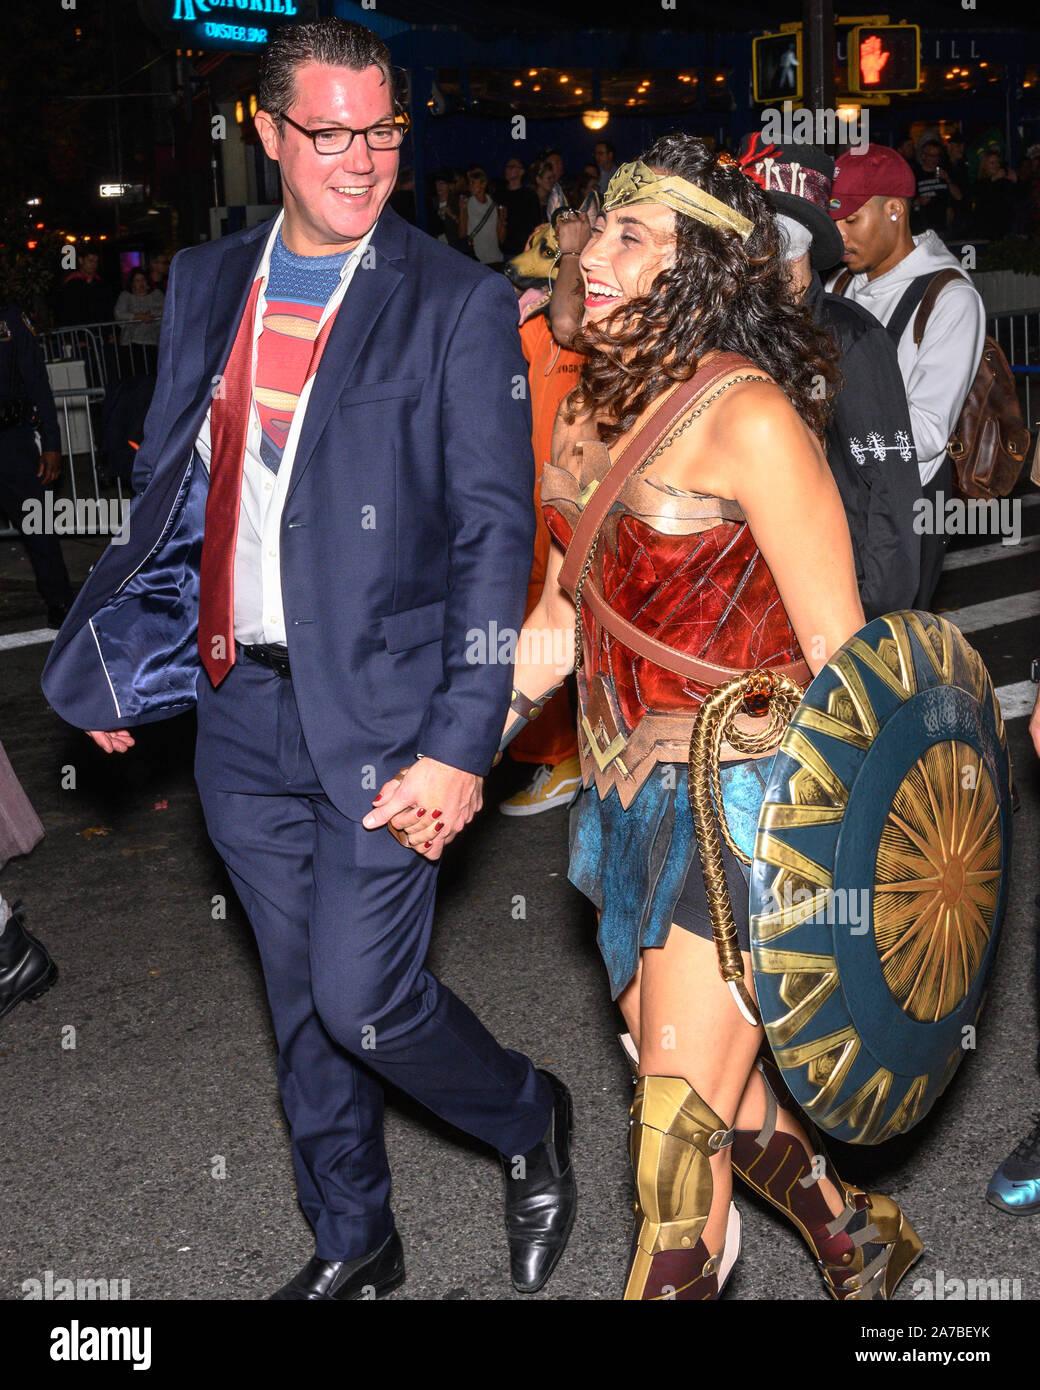 New York, USA,  31 October 2019.  Revelers wear Clark Kent/Superman and Wonder Woman costumes as they participate in the 46th NYC’s Village Halloween Parade in New York City.   Credit: Enrique Shore/Alamy Live News Stock Photo